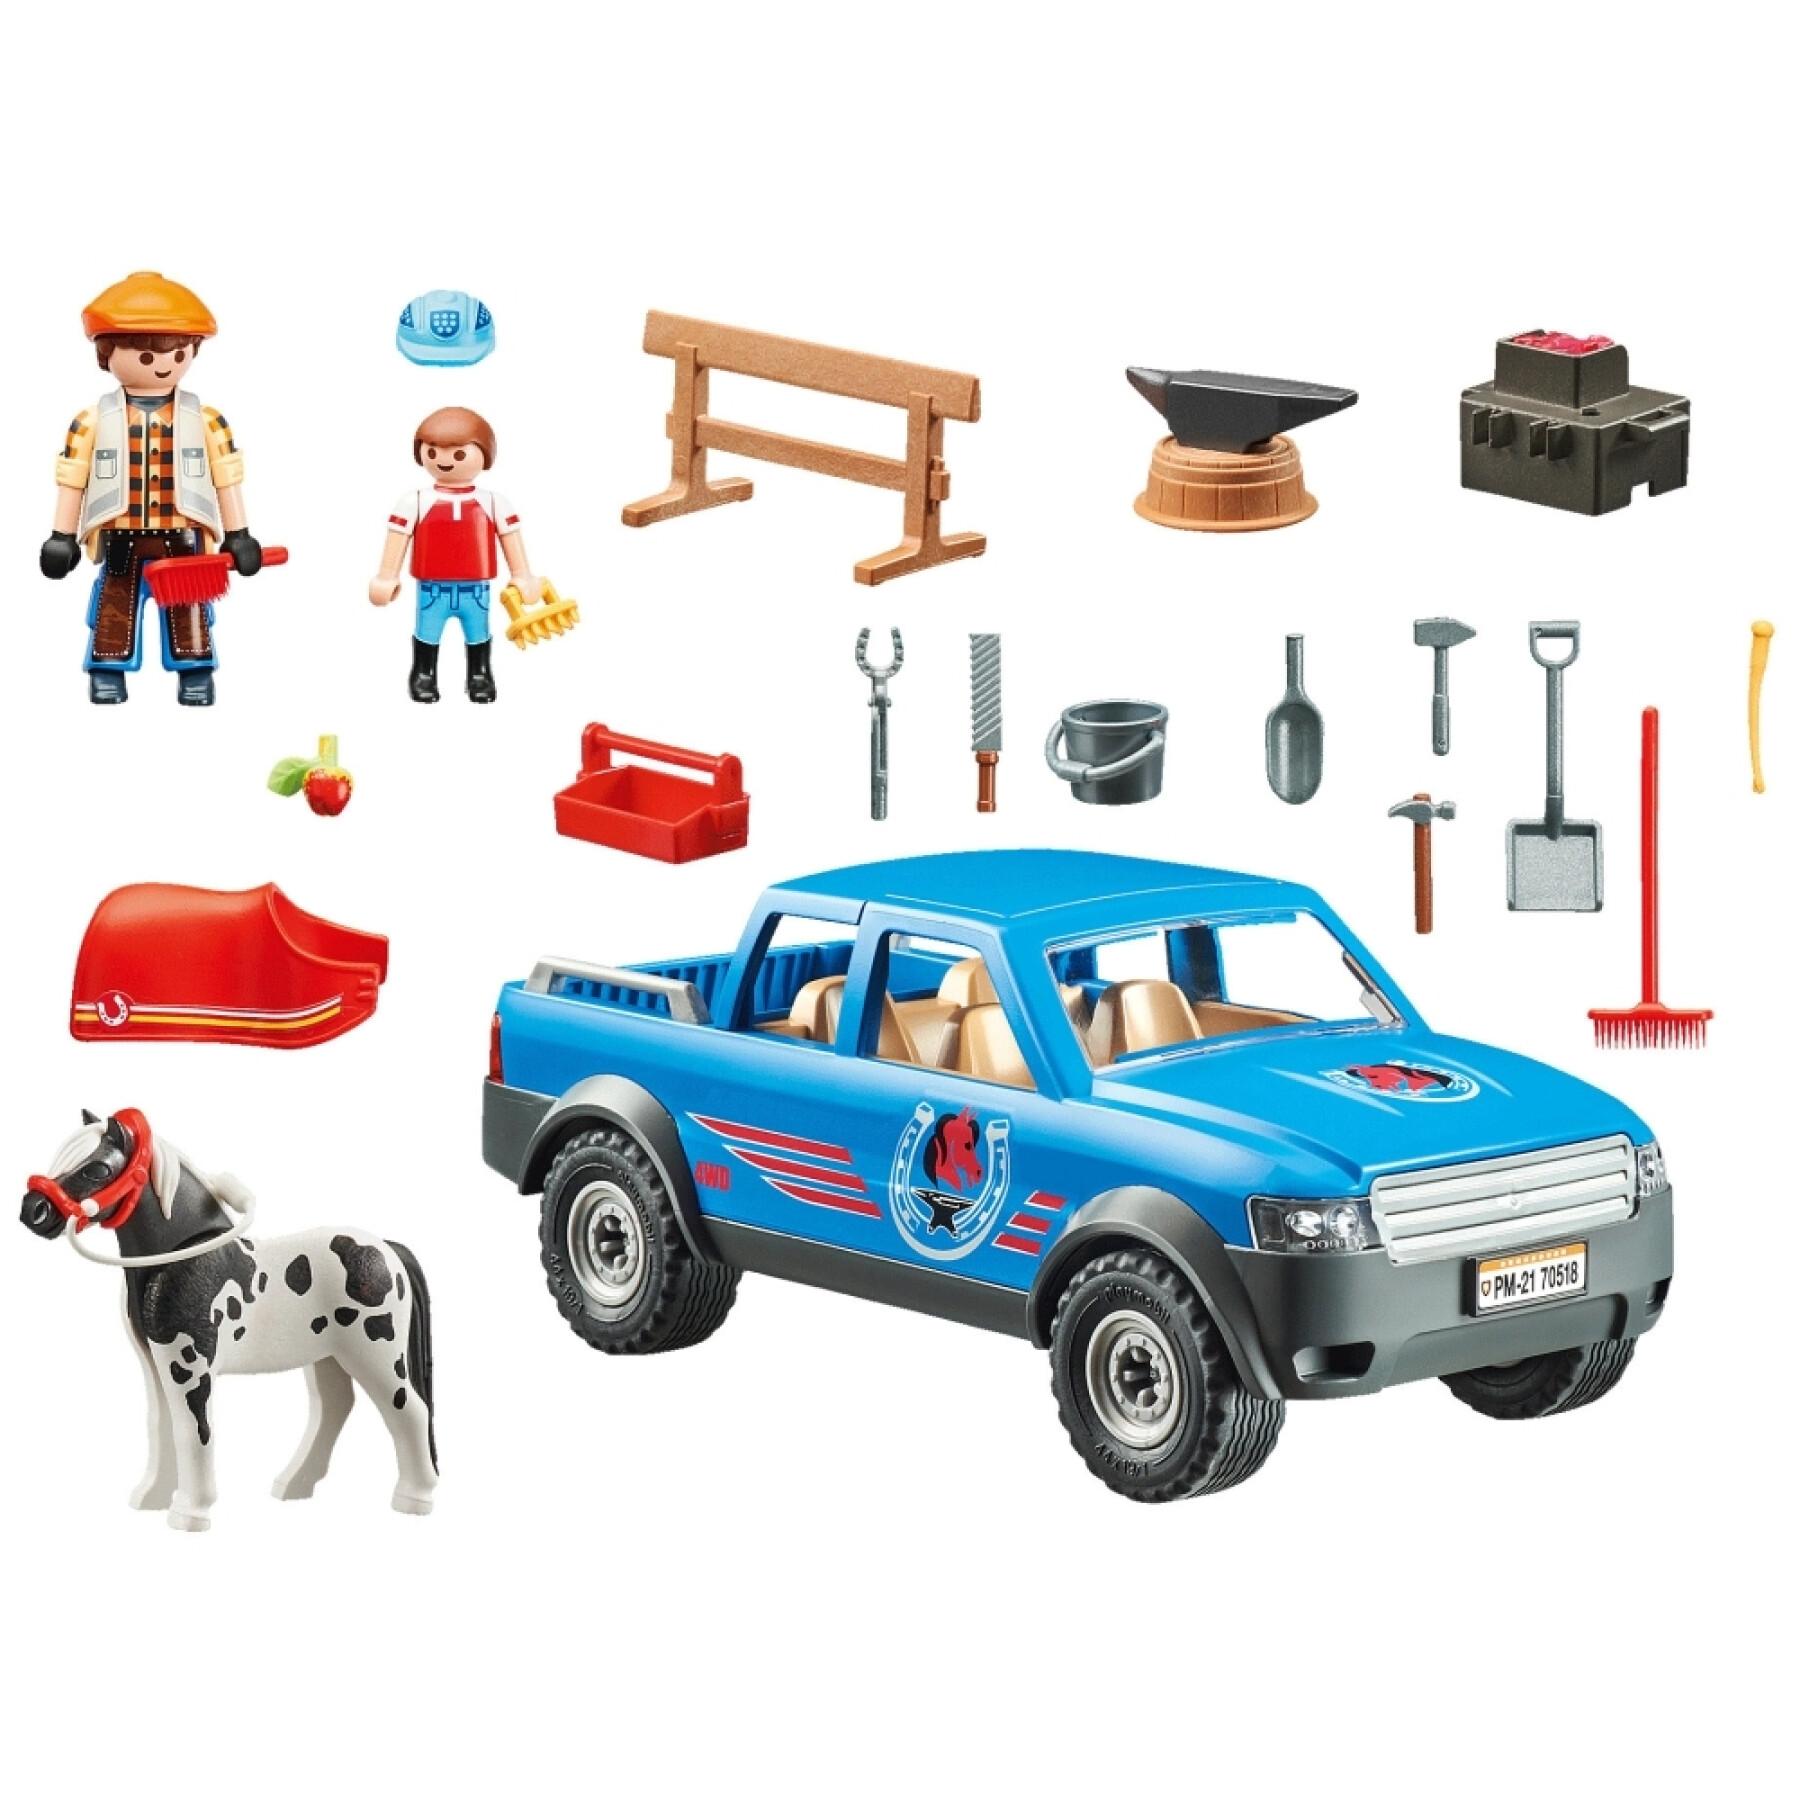 Country farrier Playmobil